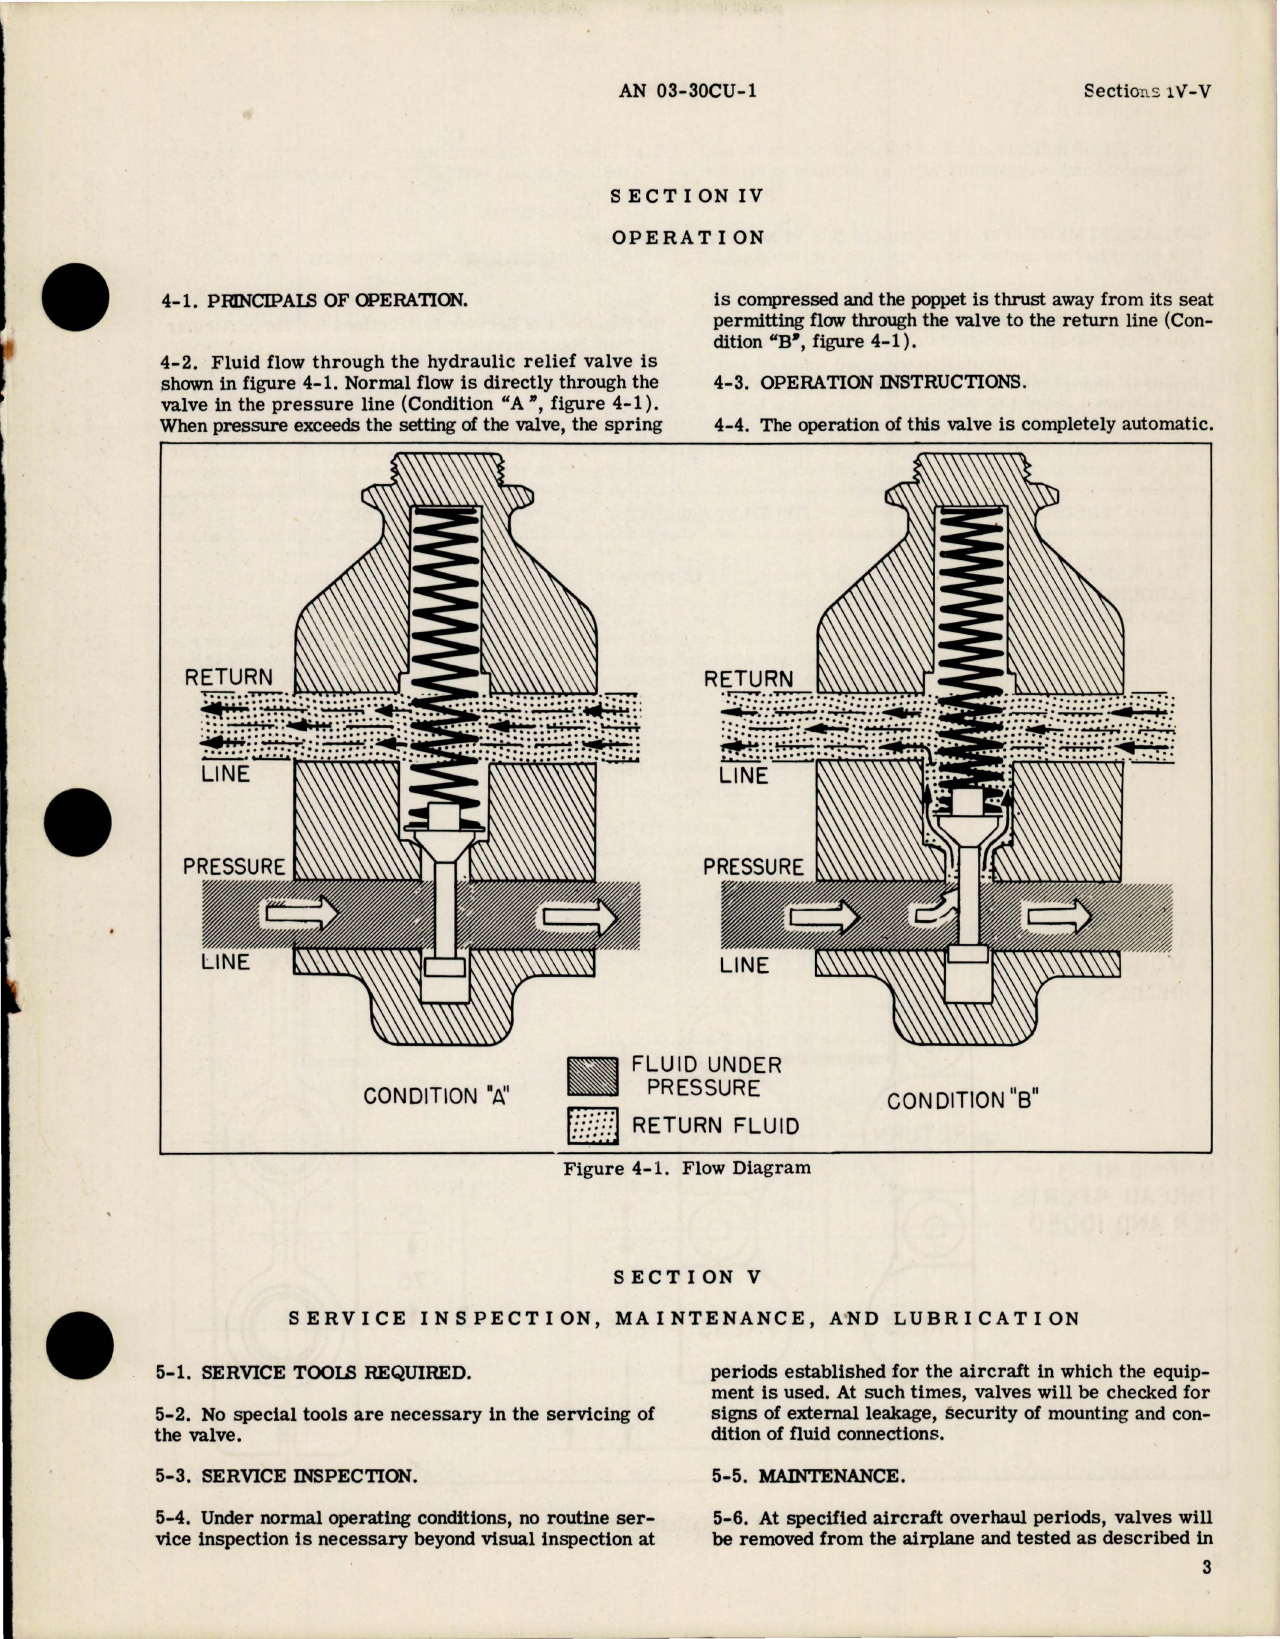 Sample page 7 from AirCorps Library document: Operation, Service, Overhaul Instructions w Parts for Hydraulic Relief Valve - Parts 6200-6AB and 1040